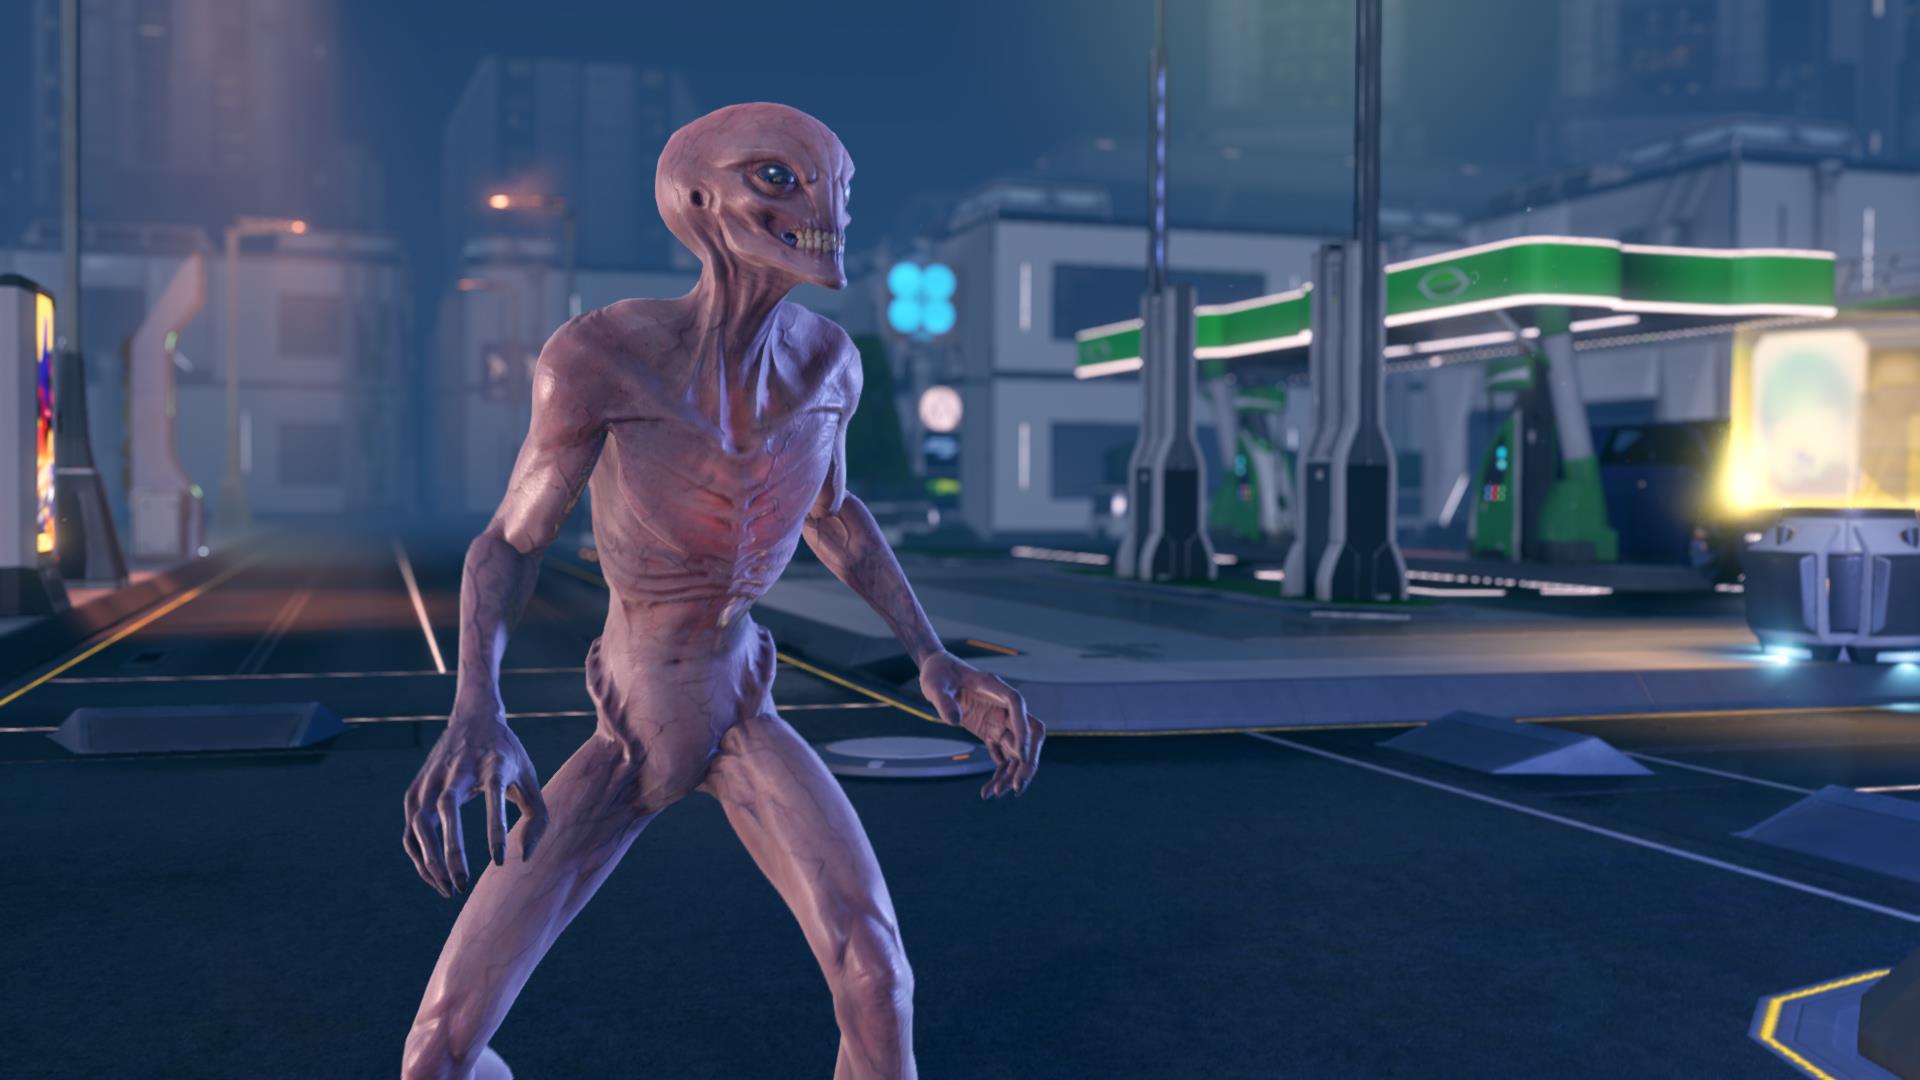 Image for XCOM 2 announced, coming 2015 as a PC exclusive 